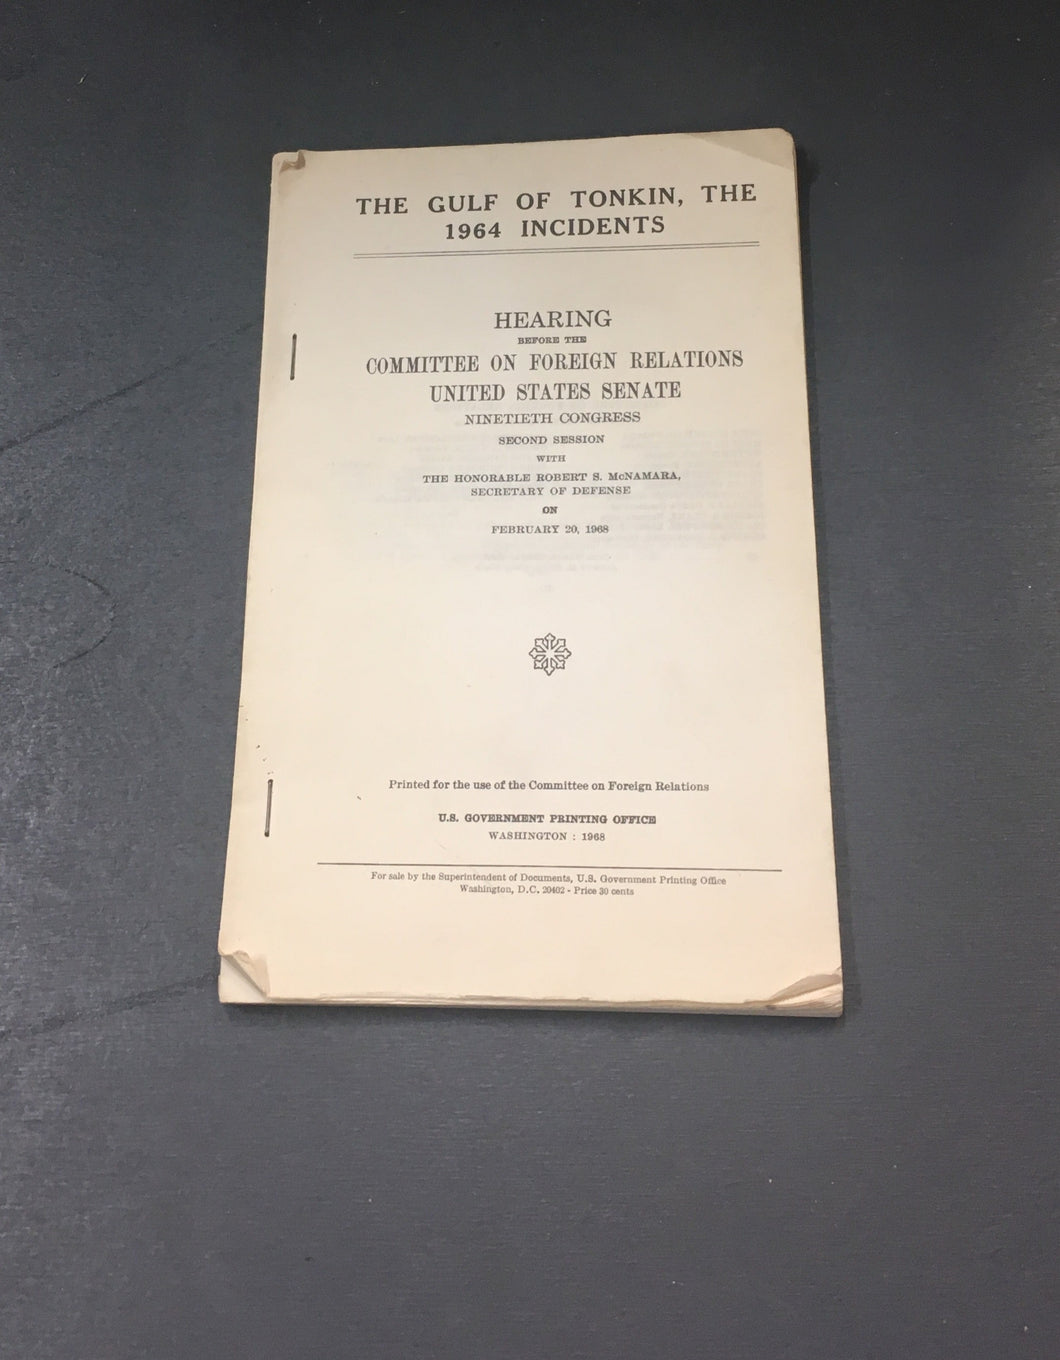 RARE!!!! Original Feb 20,1968 Hearing on the Gulf of Tonkin Incident by the Committee on Foreign Relations